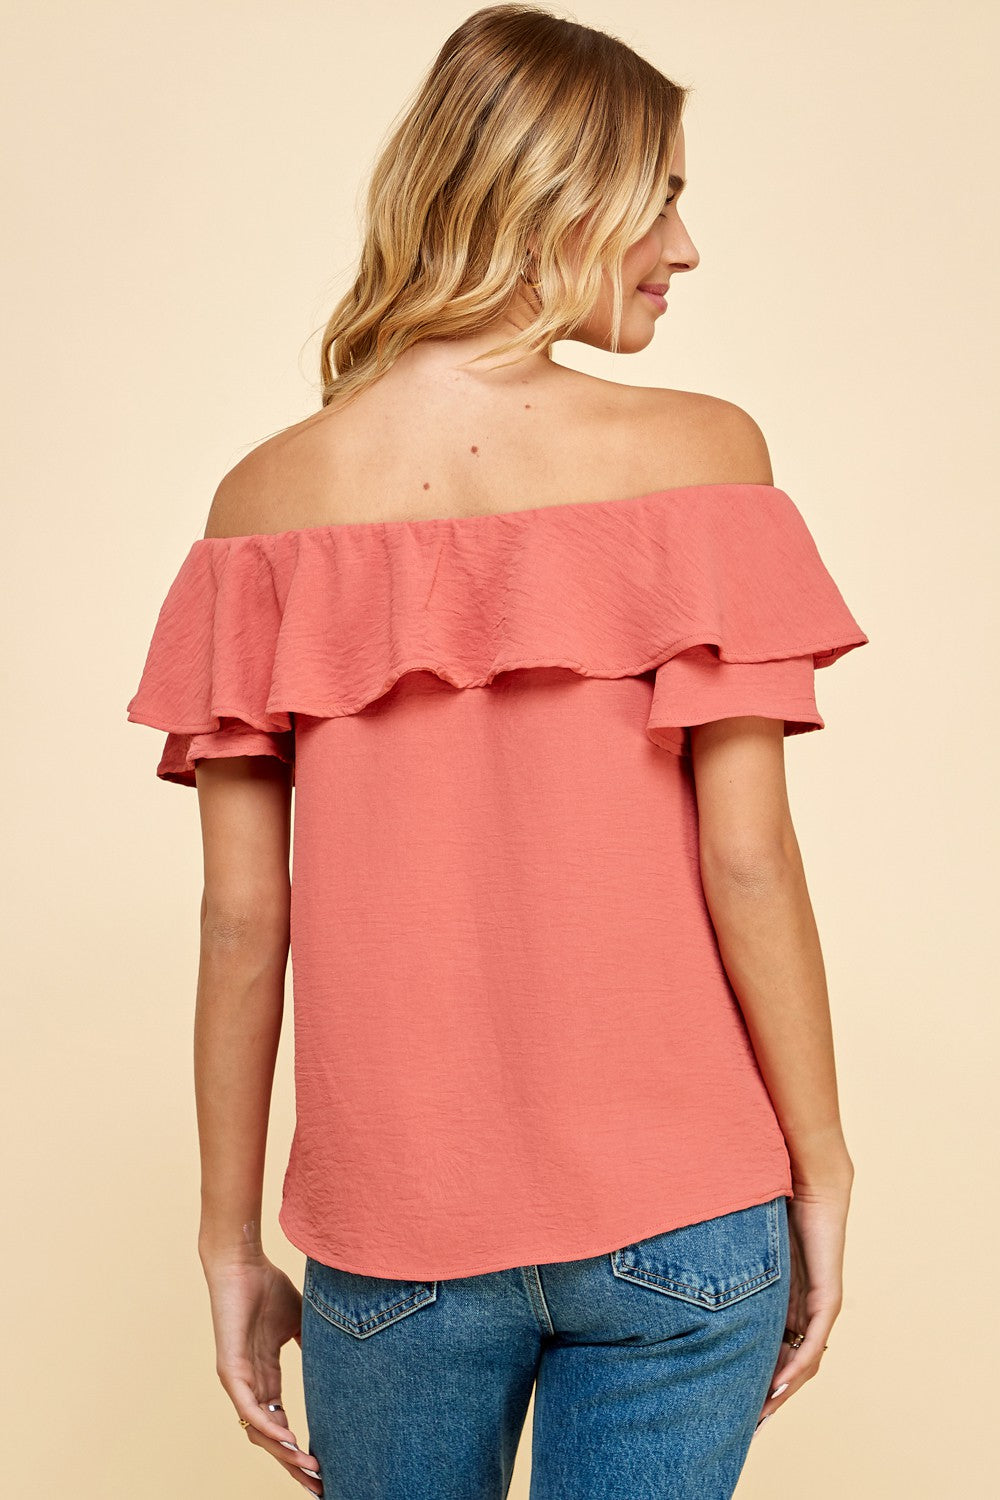 The back view of a woman wearing a Les Amis Fashion Solid Top with V Detail Off Shoulder Blouse.